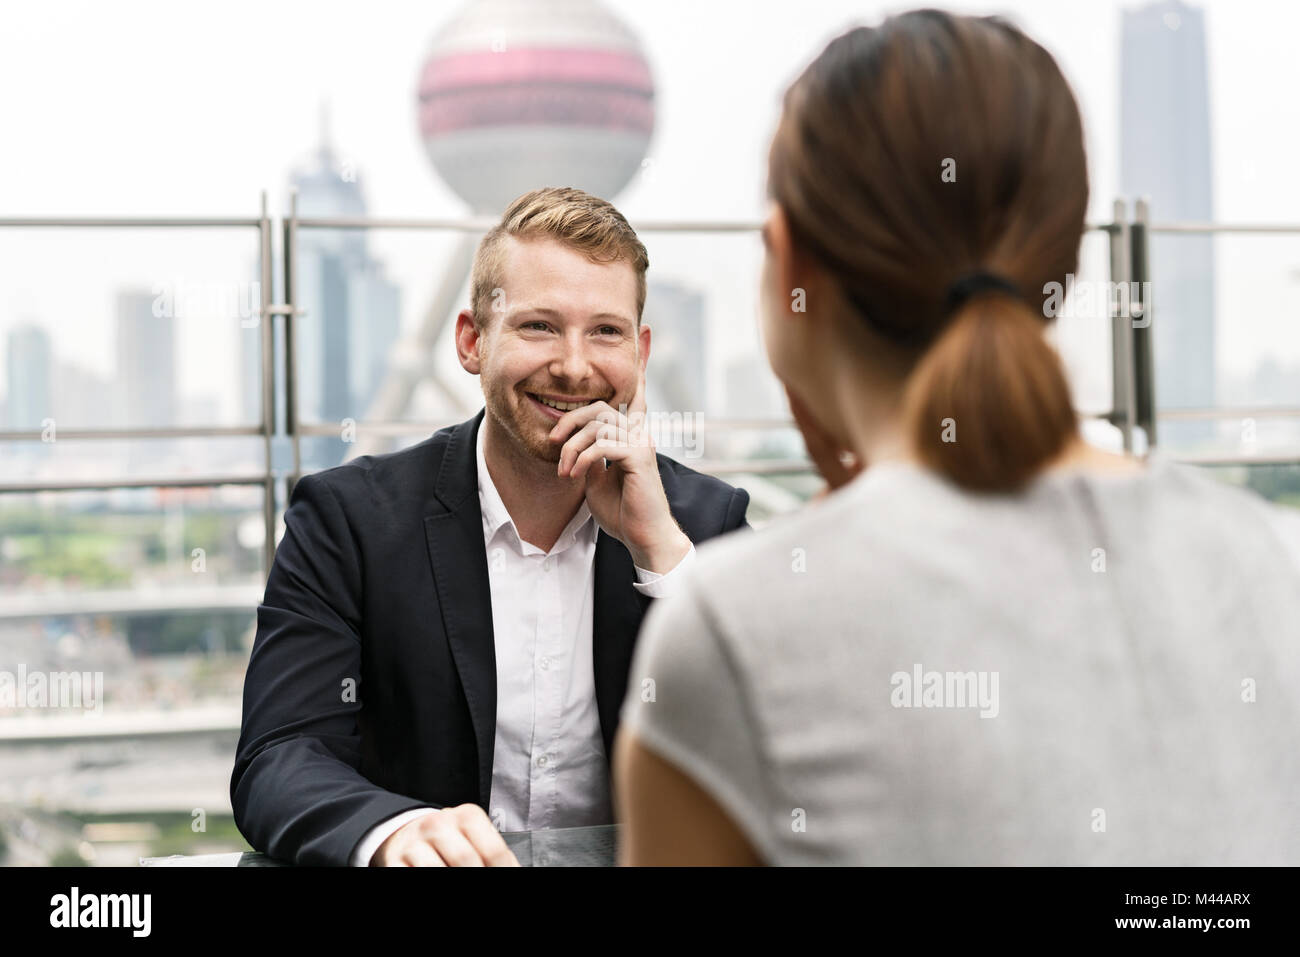 Over shoulder view of young businessman and woman having meeting at sidewalk cafe in Shanghai financial centre, Shanghai, China Stock Photo